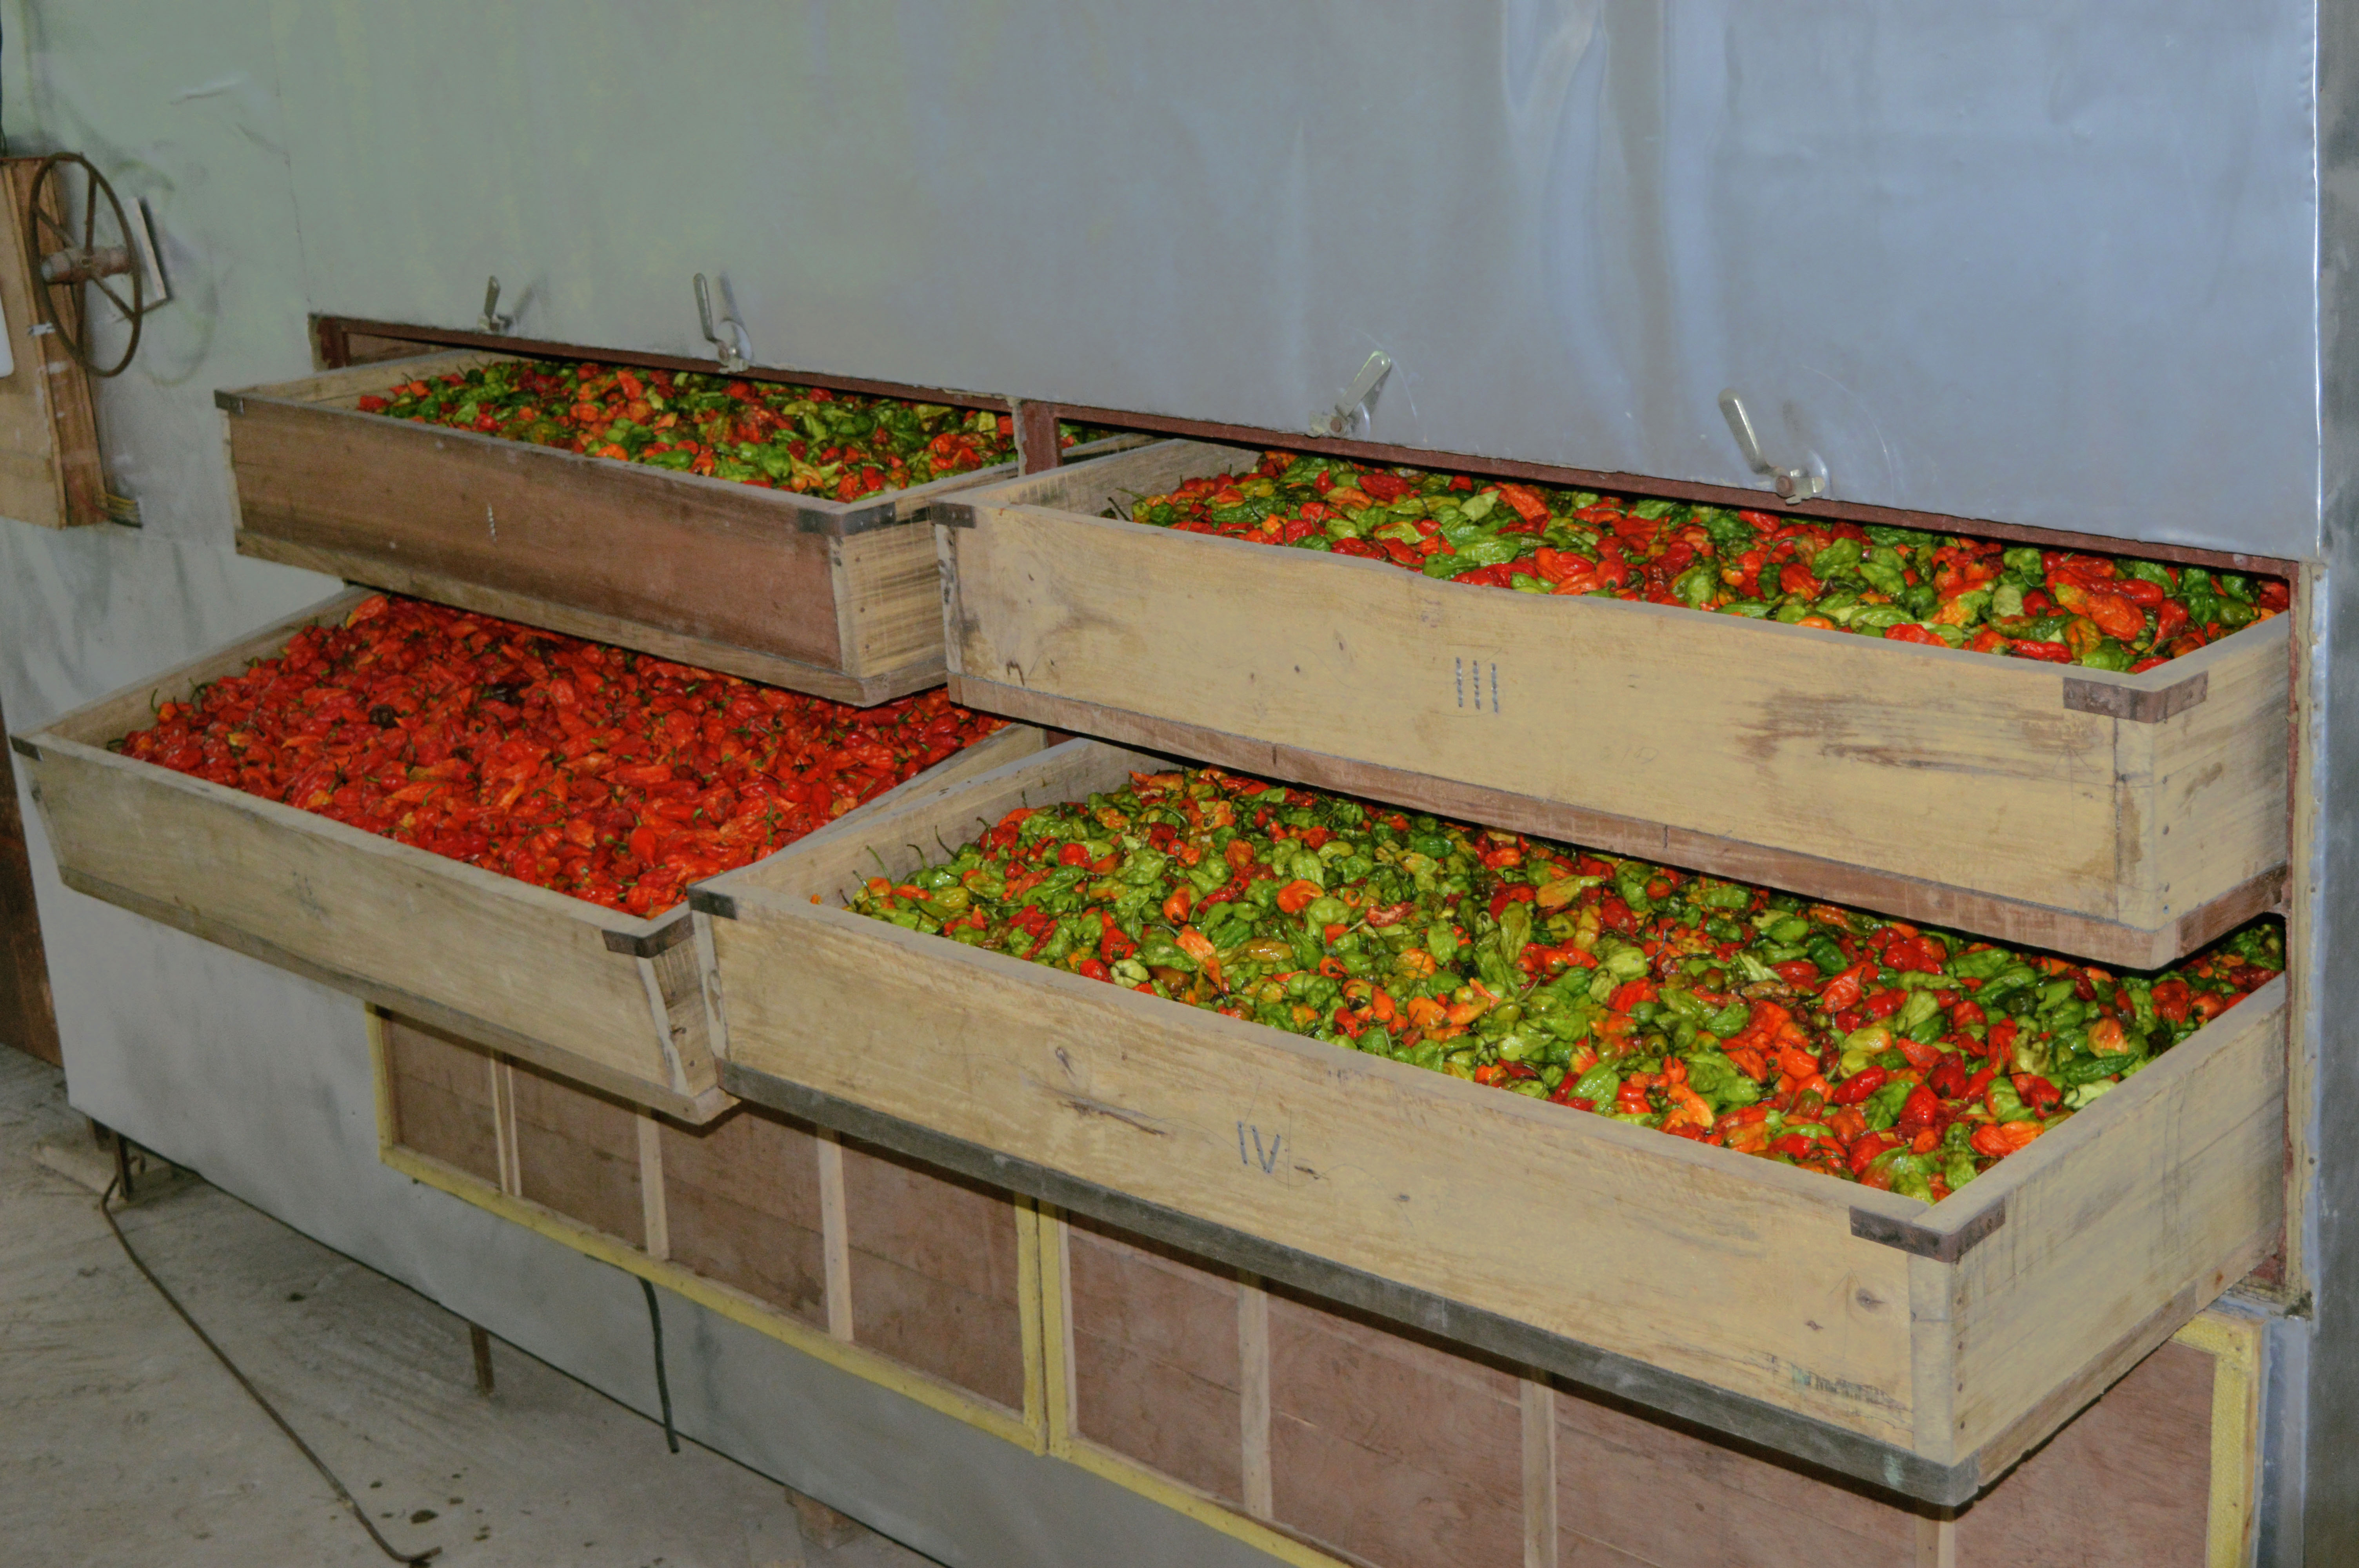 chillies-on-the-web-naga-tray-showing-the-difference-between-our-chilli-and-others-image.jpg